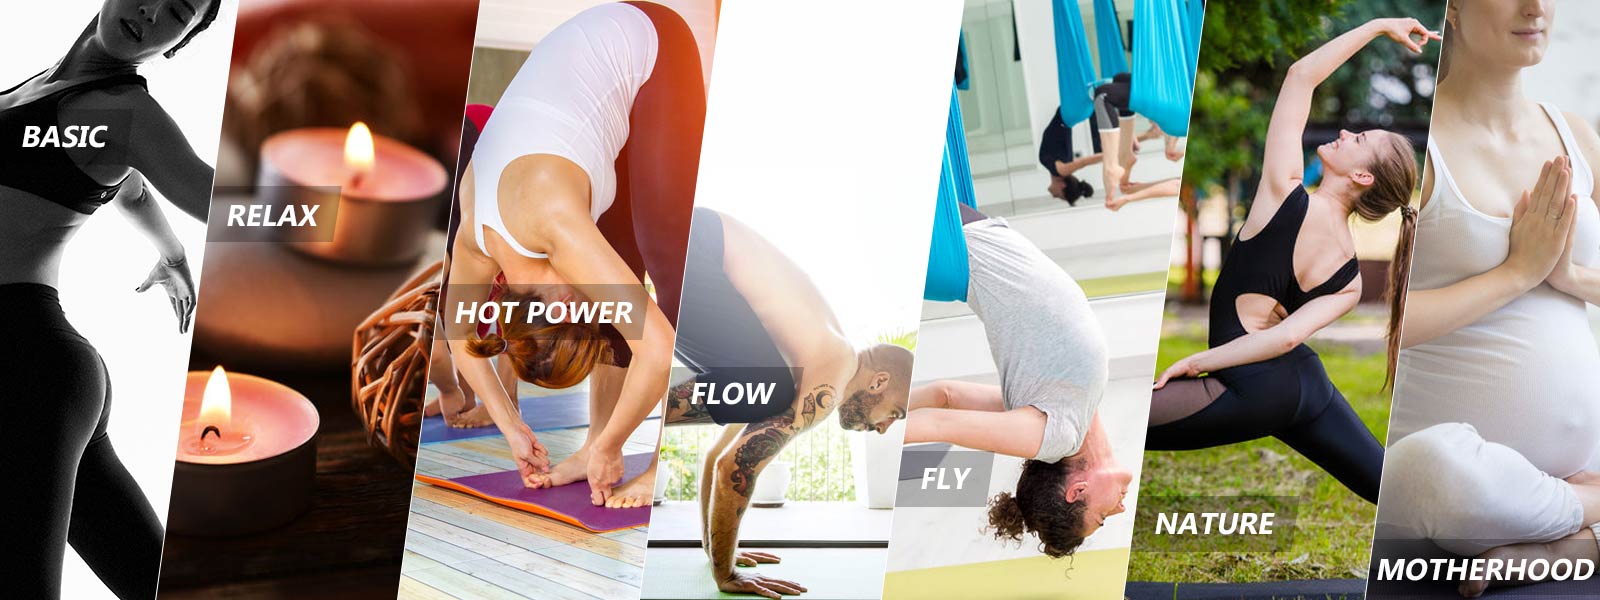 Ying Yoga Class Types - Basic, Relax, Hot Power, Flow, Fly, Nature, Motherhood